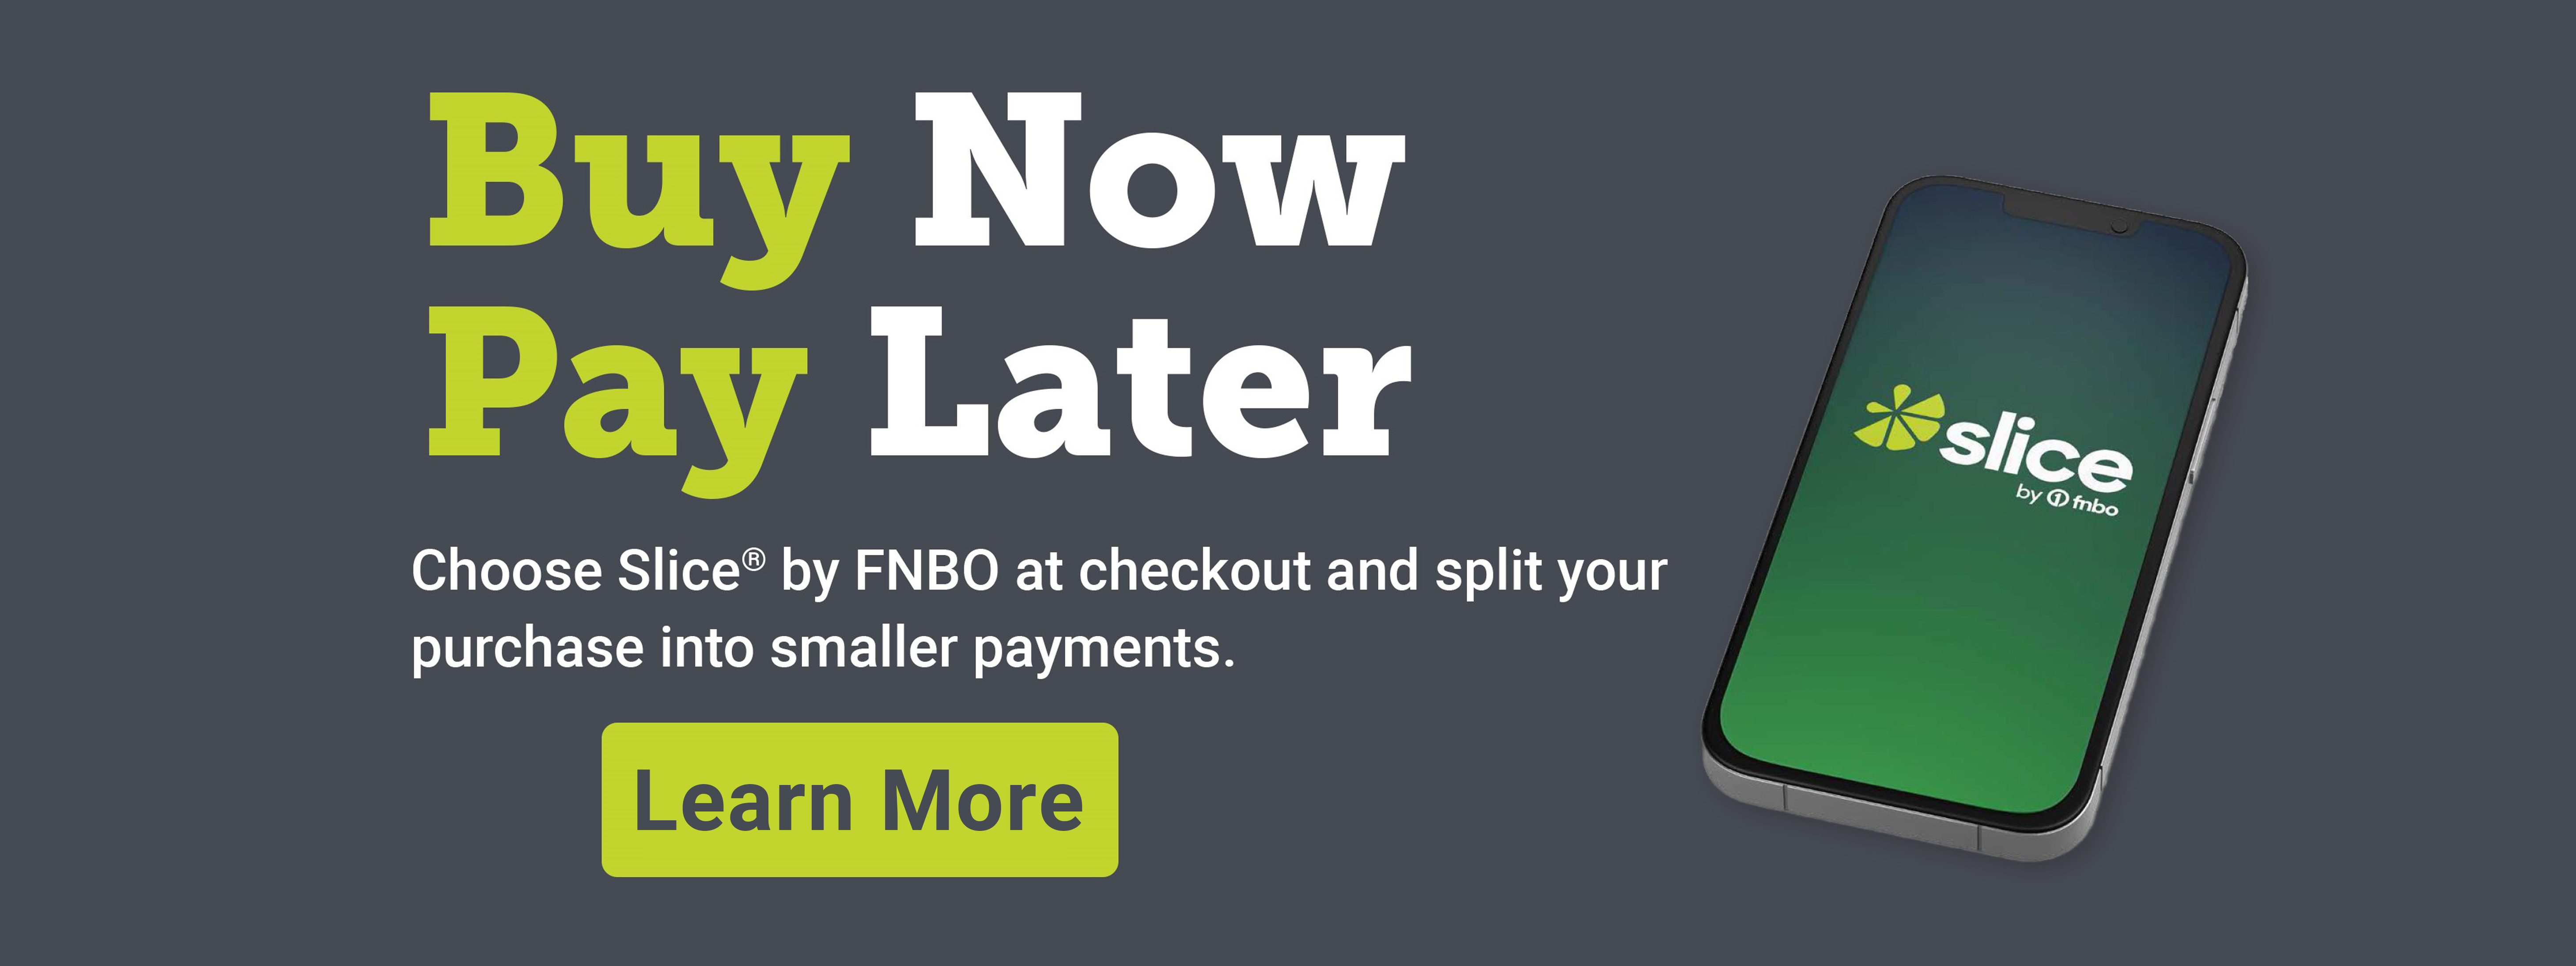 Buy Now Pay Later with Slice by FNBO